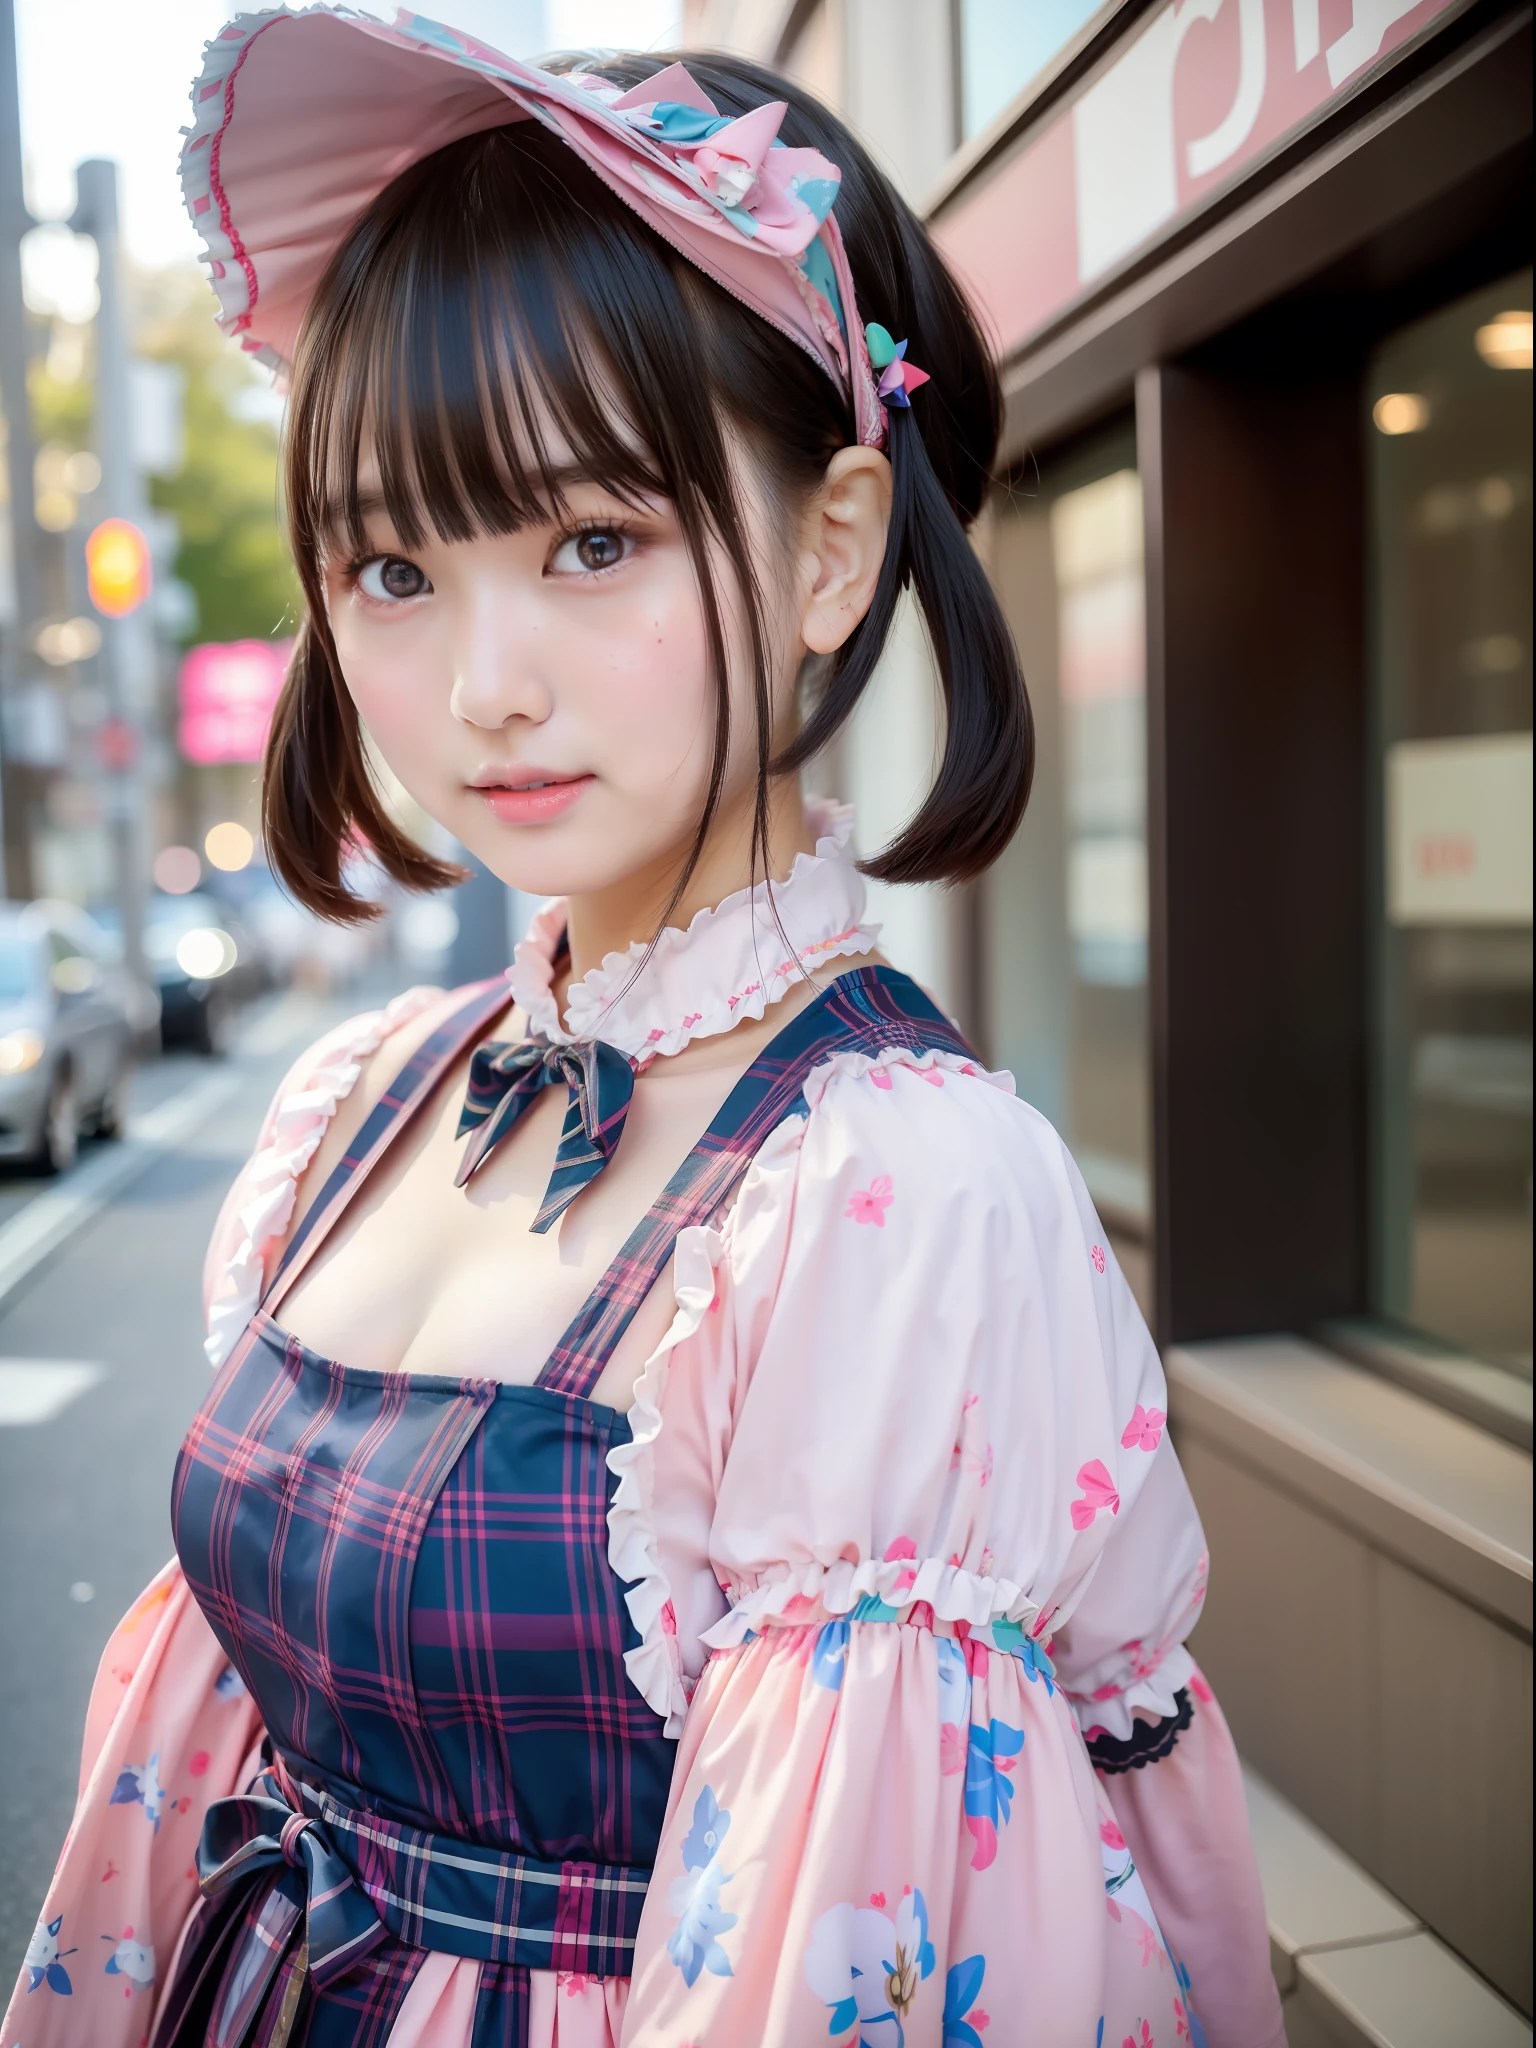 1 girl, solo, (short hair), japanese idol, perfect figure, beautiful eyes double eyelids, lolita fashion, colorful pastel color clothes, look like a grown-up expression, downtown like Harajuku, broad smile, upper body, blow a wind, slim body